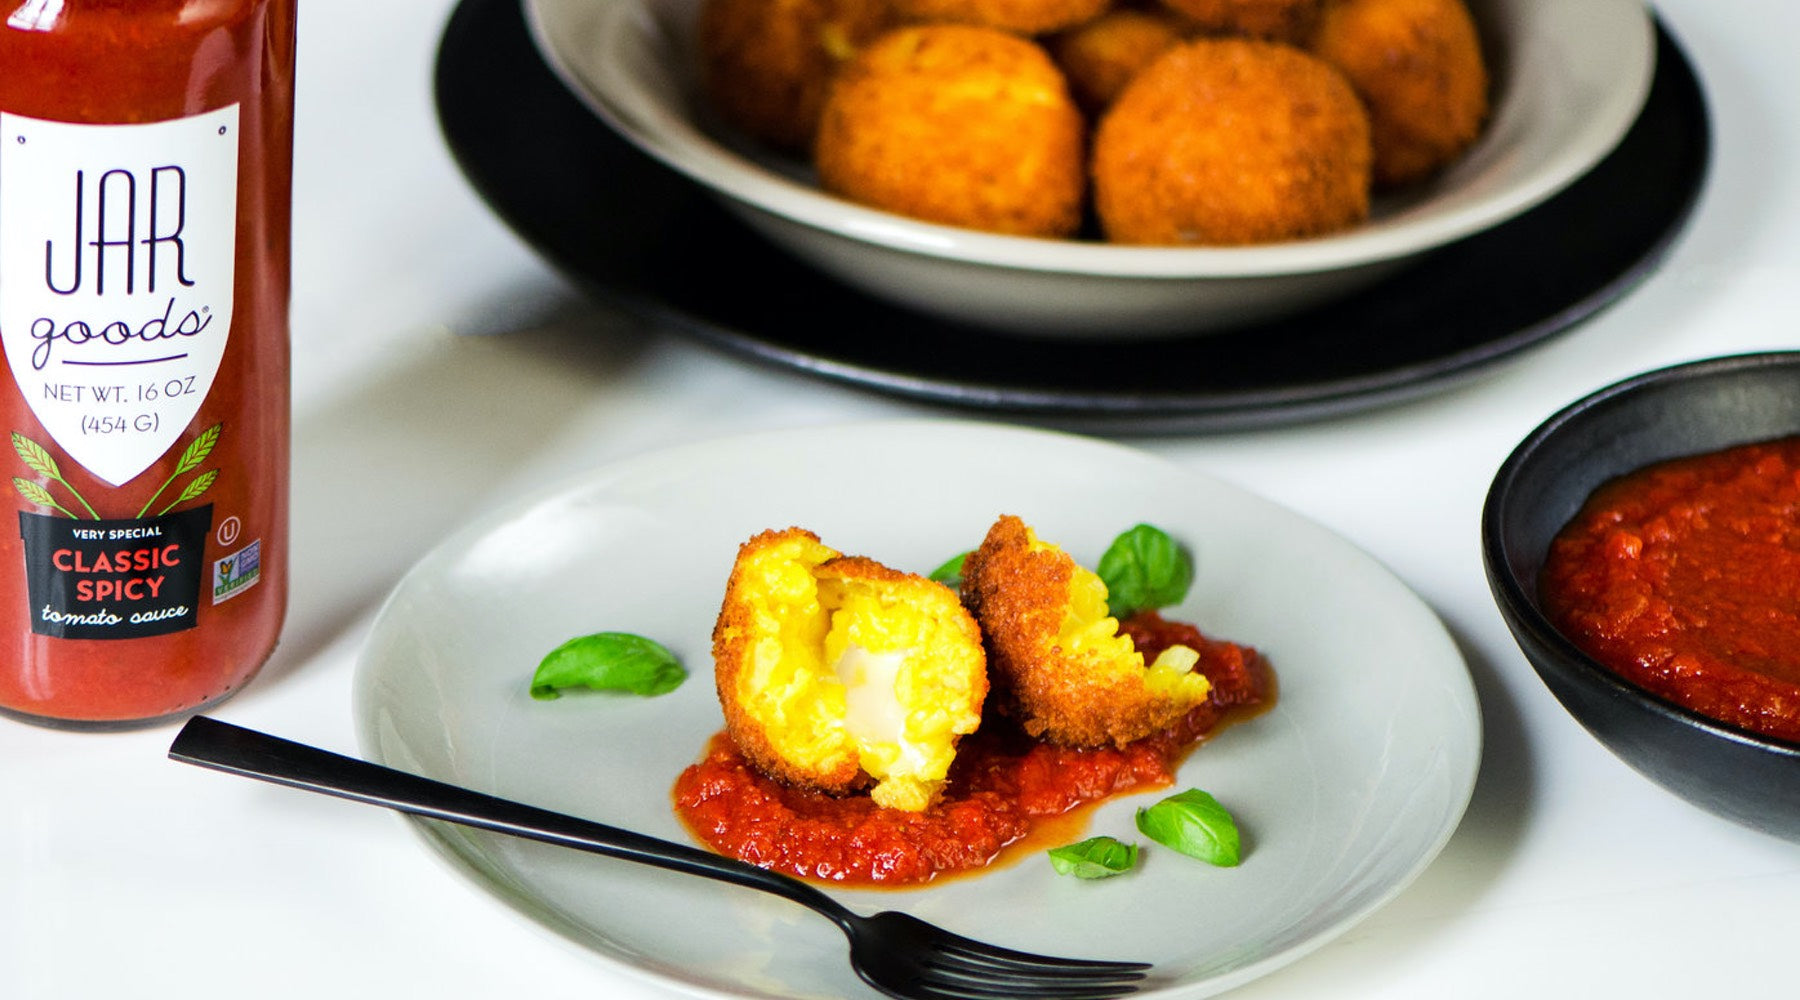 Risotto balls with Classic Spicy tomato sauce